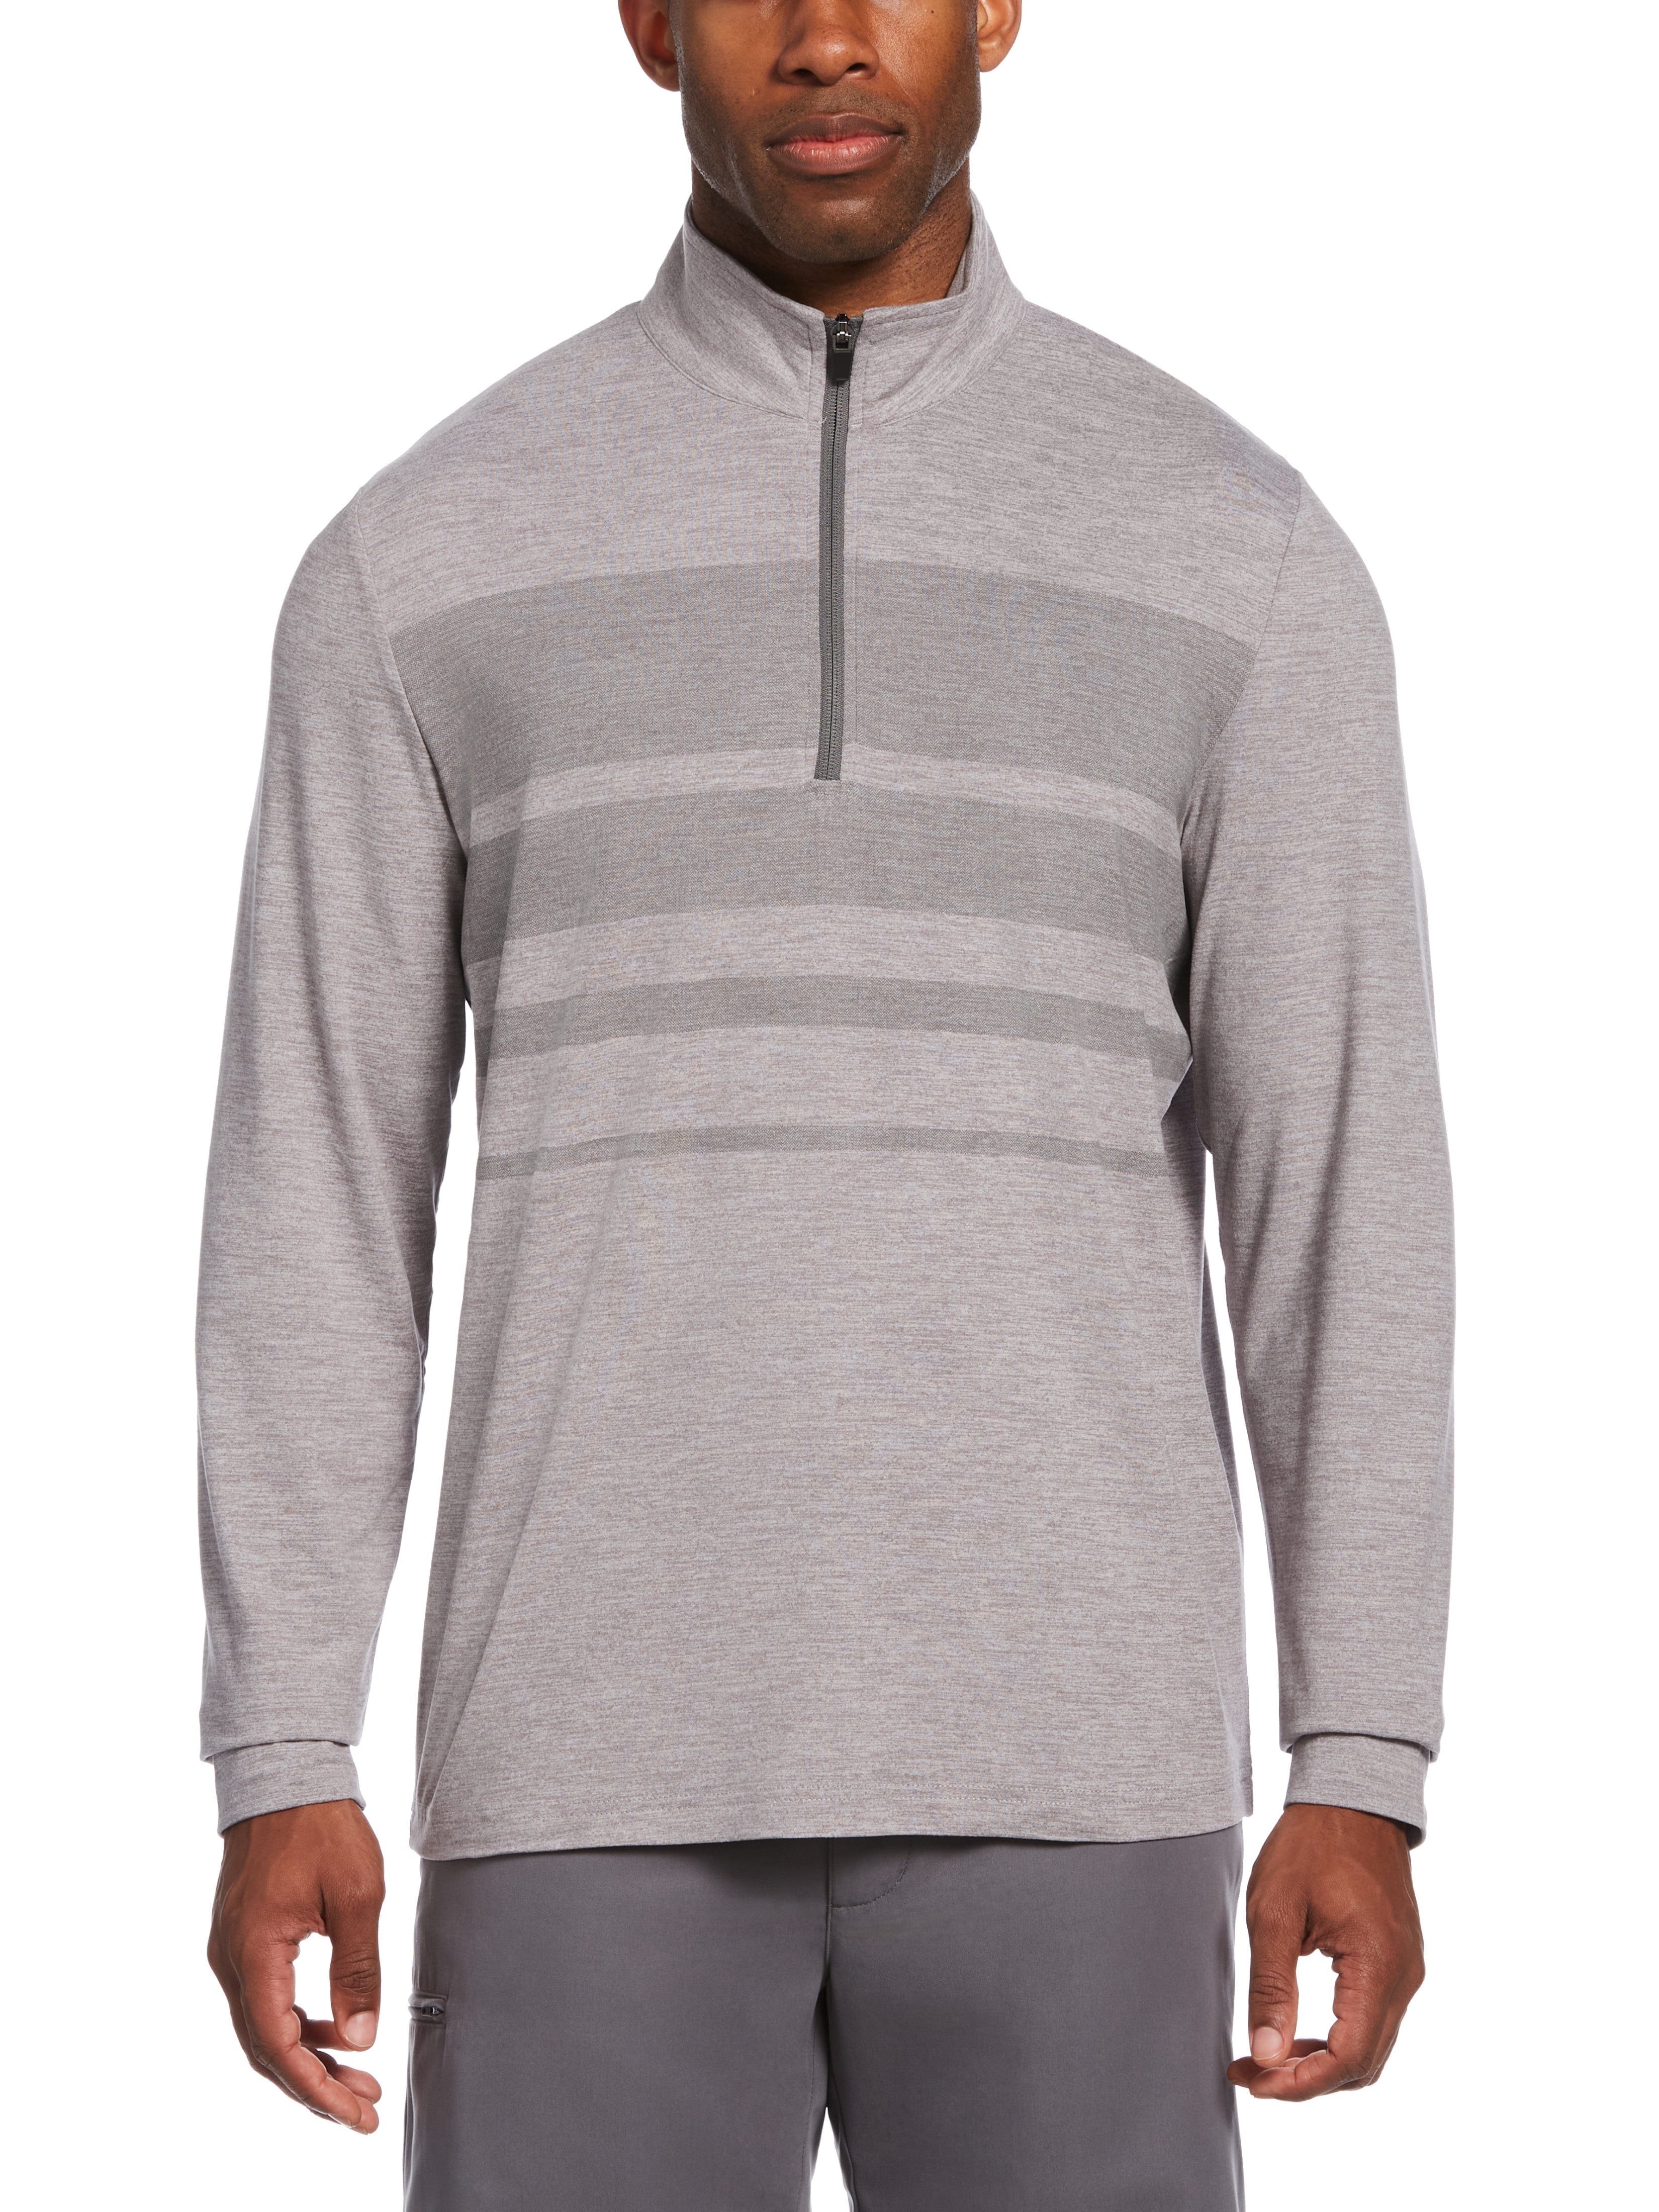 PGA TOUR Apparel Mens Luxury Performance Stretch 1/4 Zip Golf Pullover Top, Size Small, Light Grey Heather Gray, Polyester/Elastane